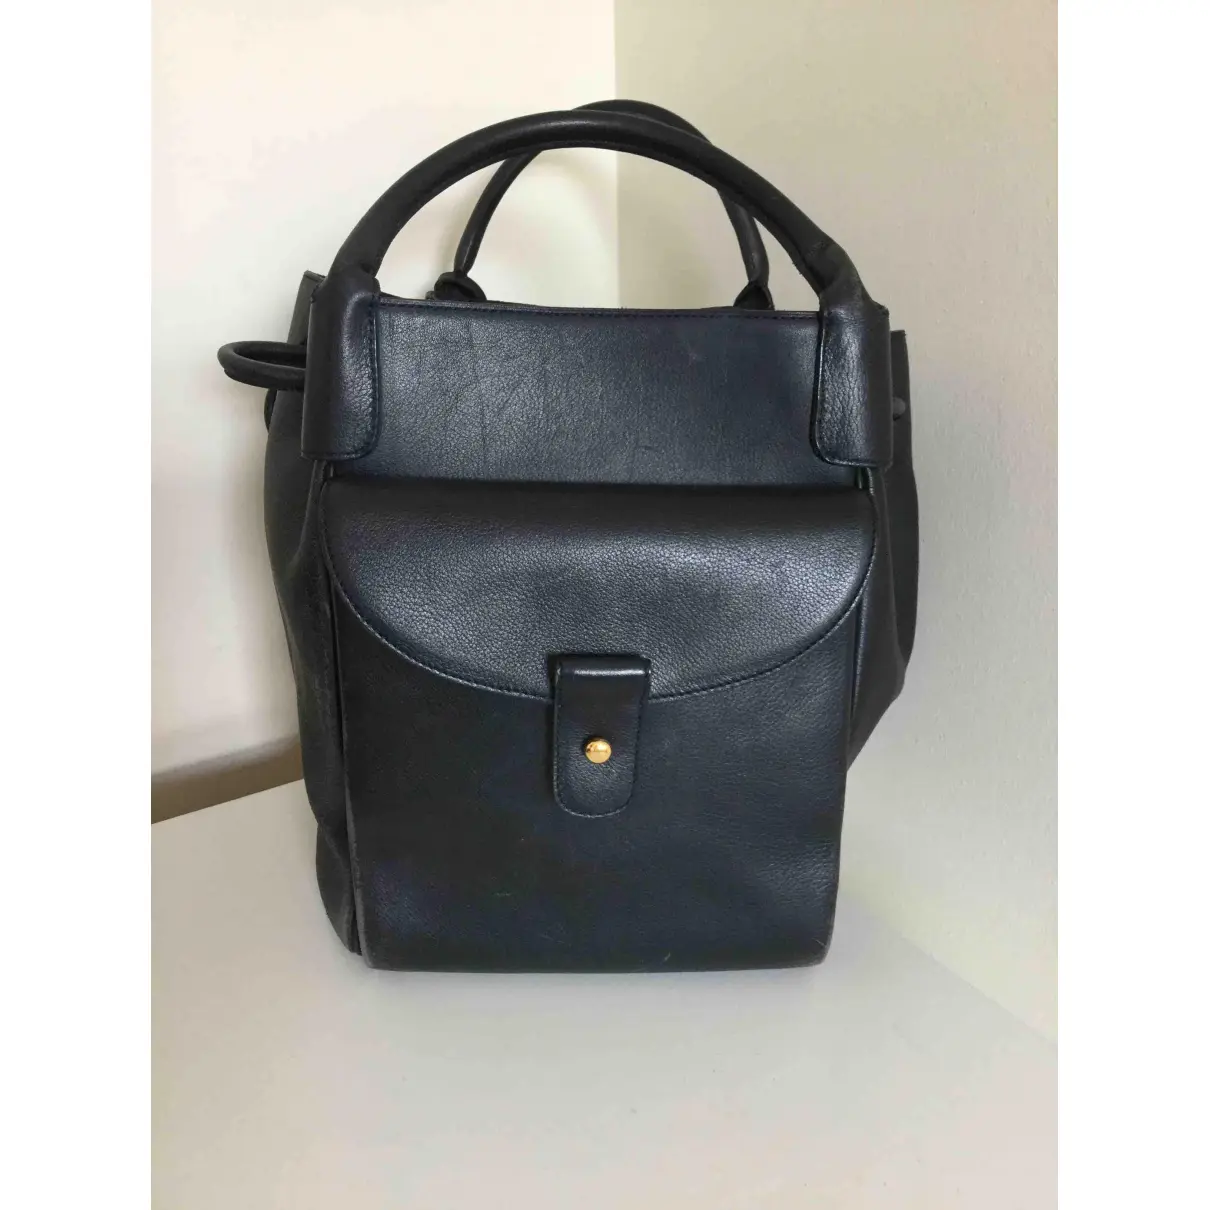 D to D leather bag Delvaux